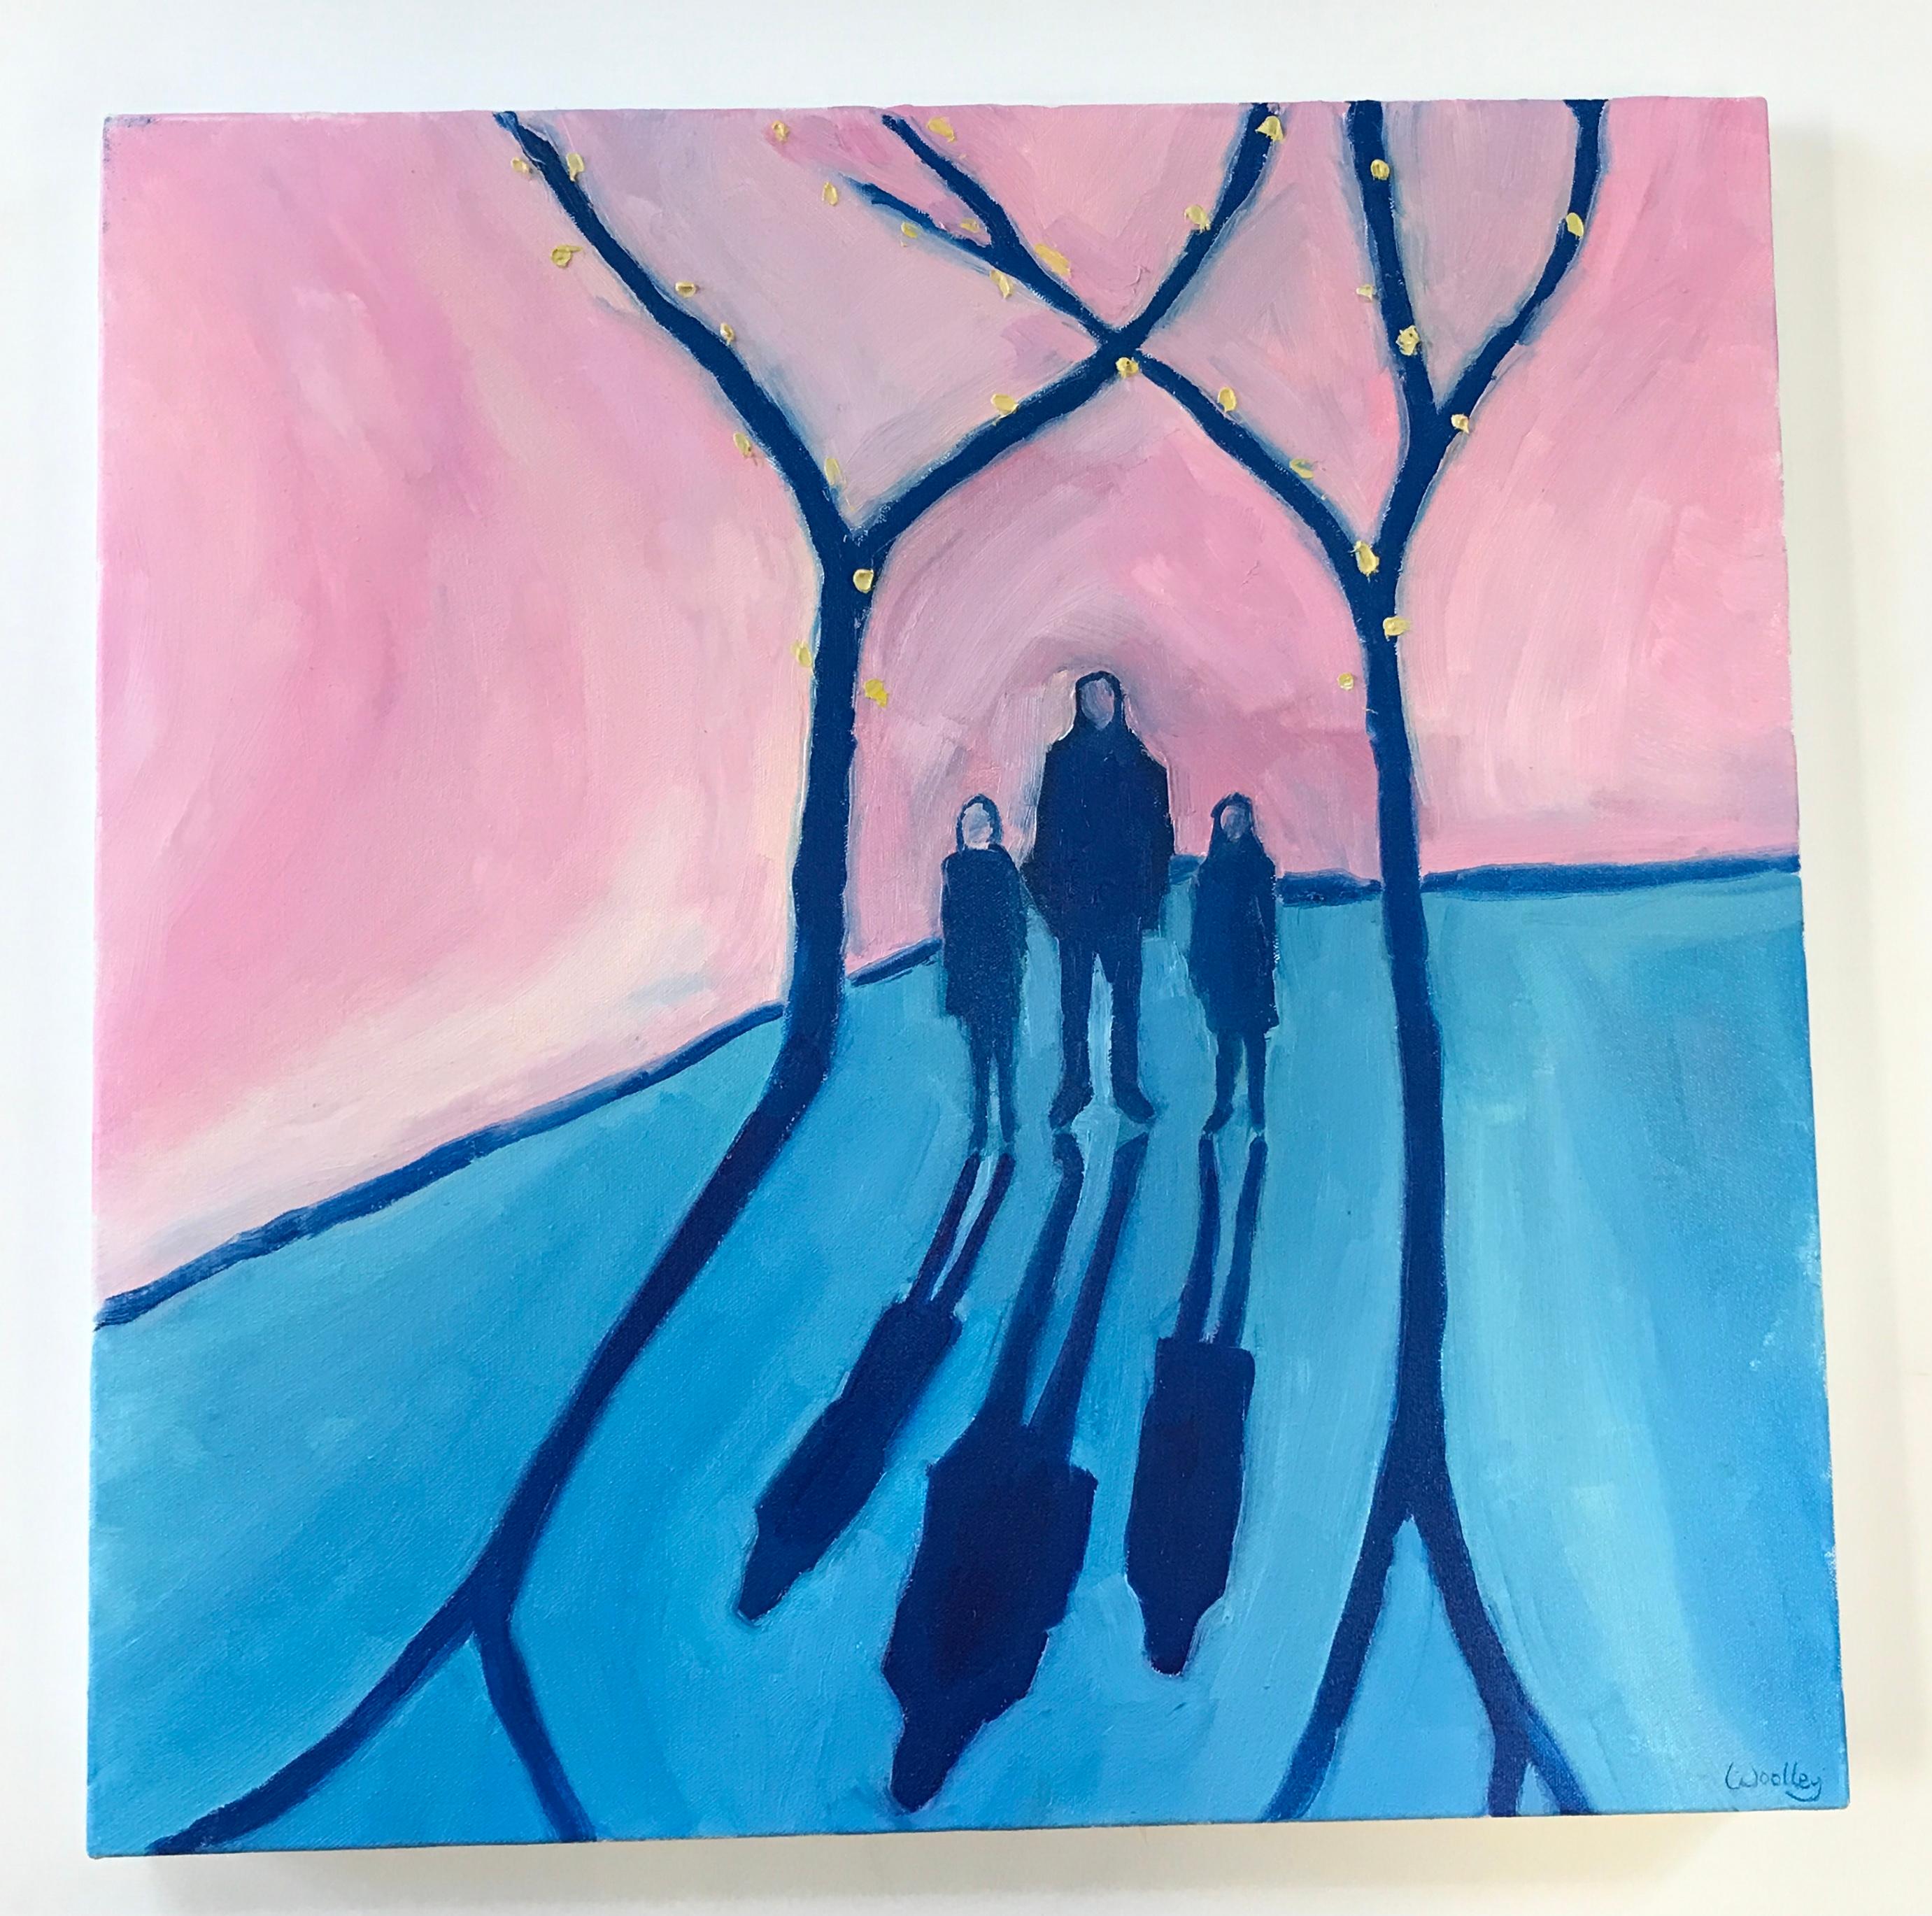 Cotswolds sunset 2 by Eleanor Woolley depicts two shadows on a walk in the park. This painting is on a canvas 60 x 60 cm and 4 cm depth. 

ADDITIIONAL INFORMATION:
Oil Paint on Canvas
60 H x 60 W x 2 D cm (23.62 x 23.62 x 0.79 in)
Sold